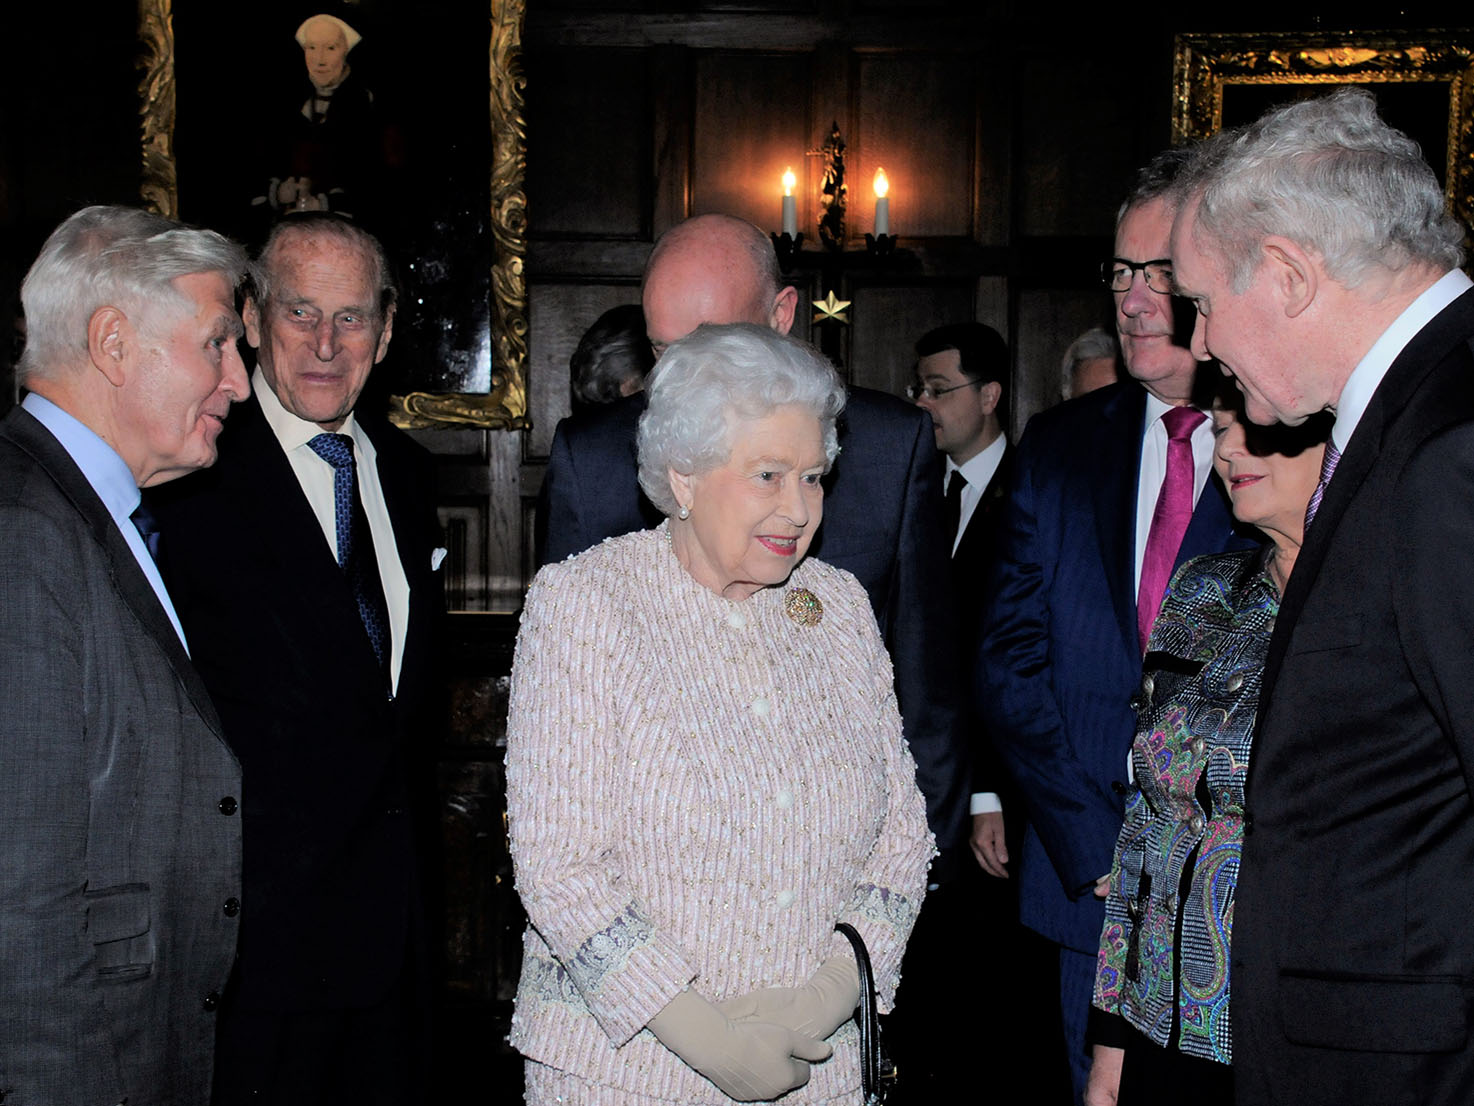 The Queen, The Duke of Edinburgh, Dr. Moran and Martin McGuinness at Crosby Moran Hall